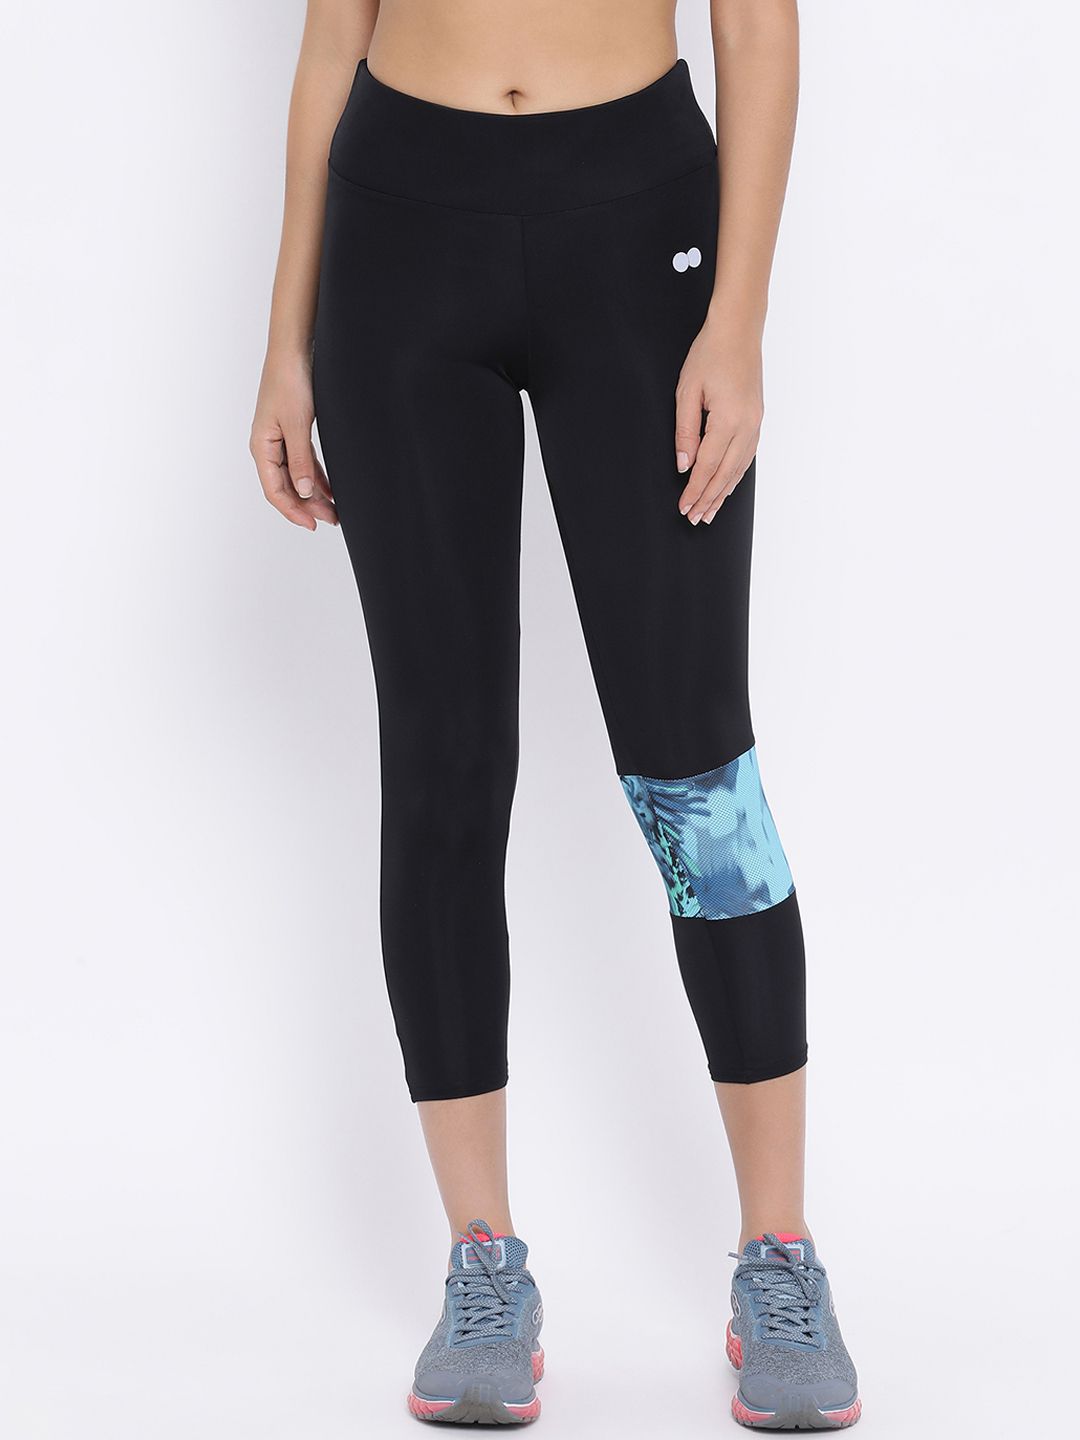 Clovia Women Black Solid Sports Activewear Tights Price in India